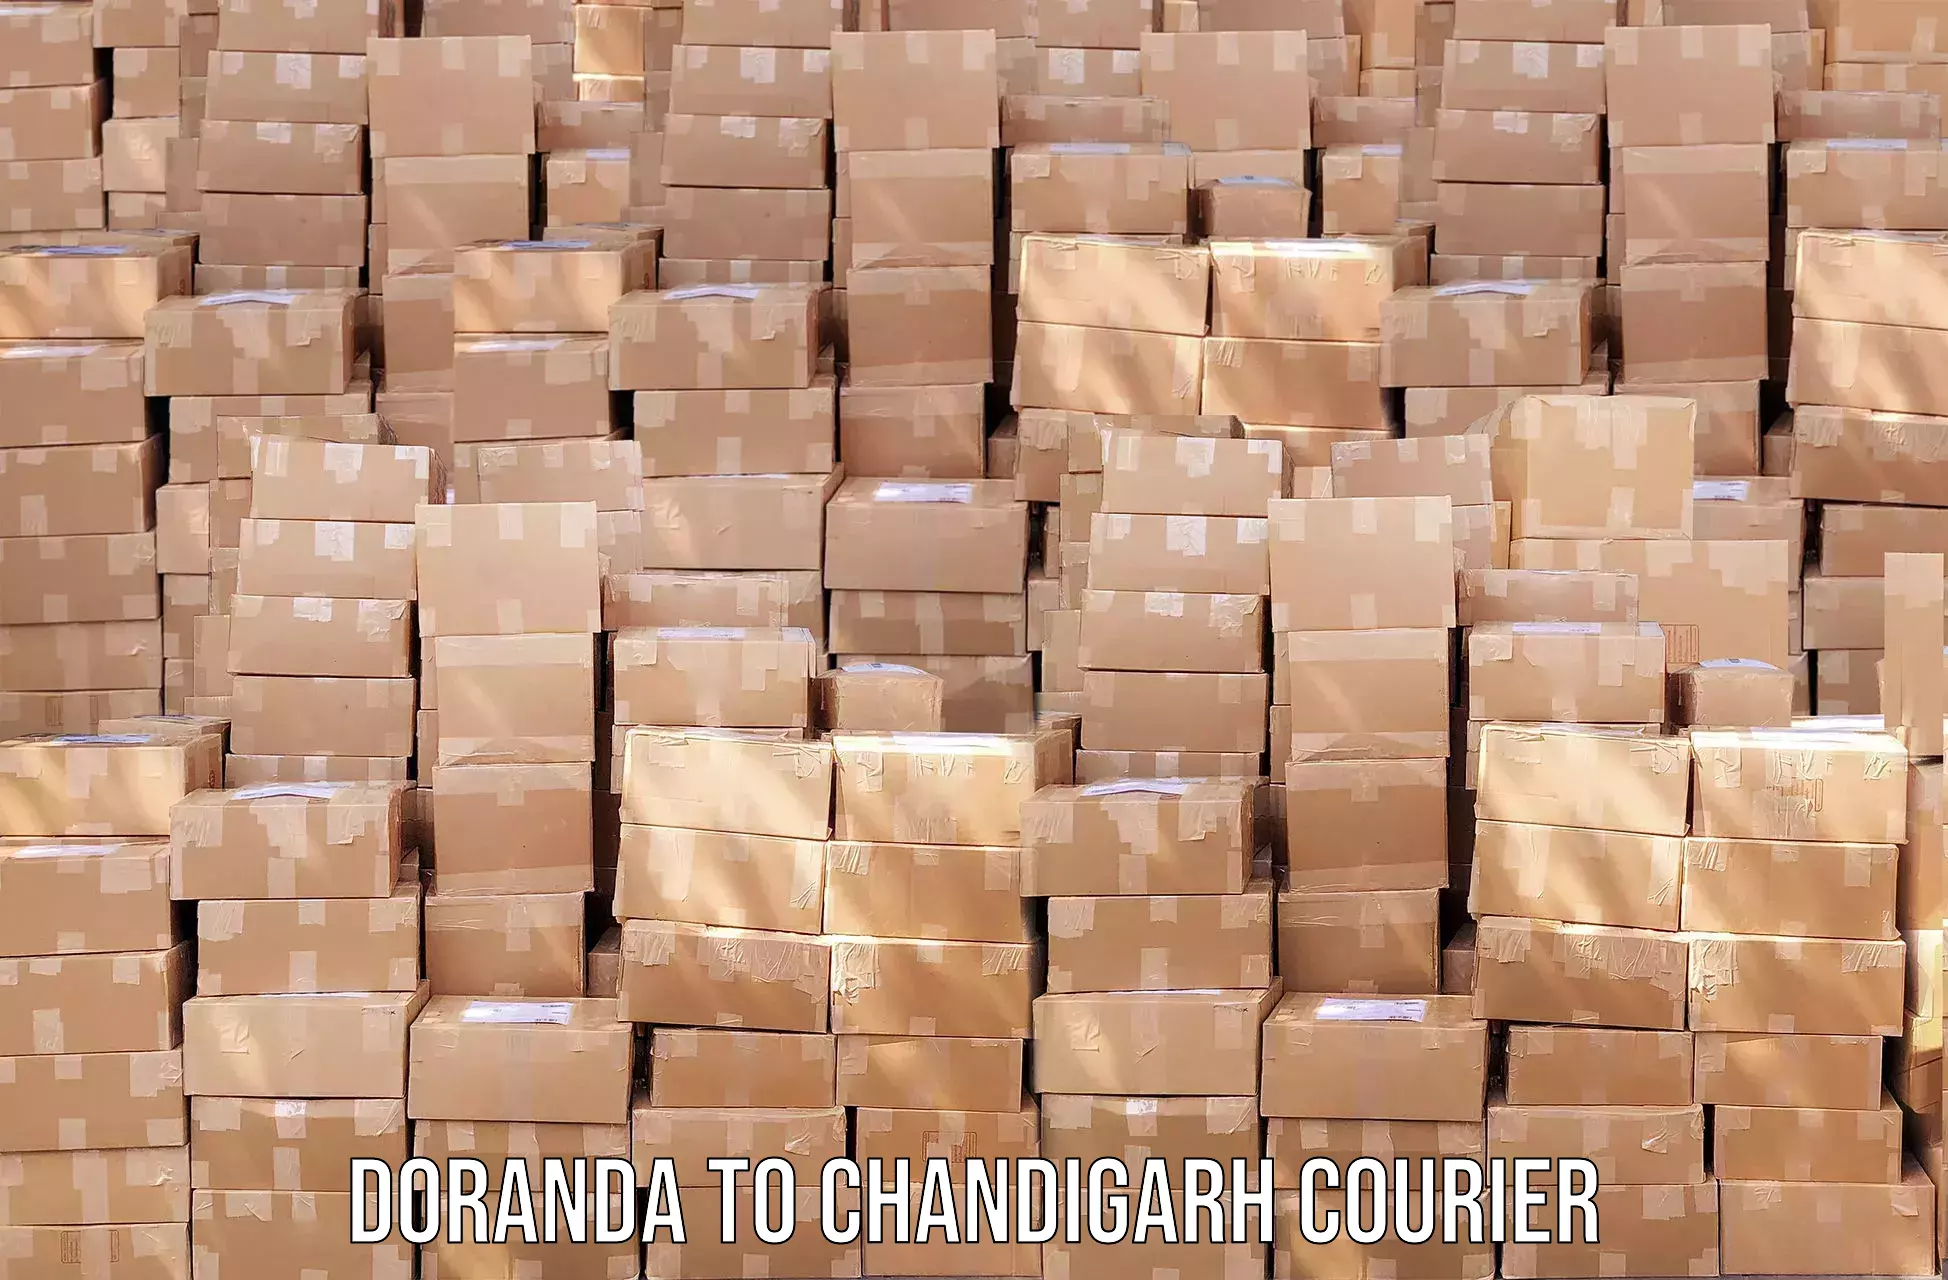 Same-day delivery solutions Doranda to Chandigarh